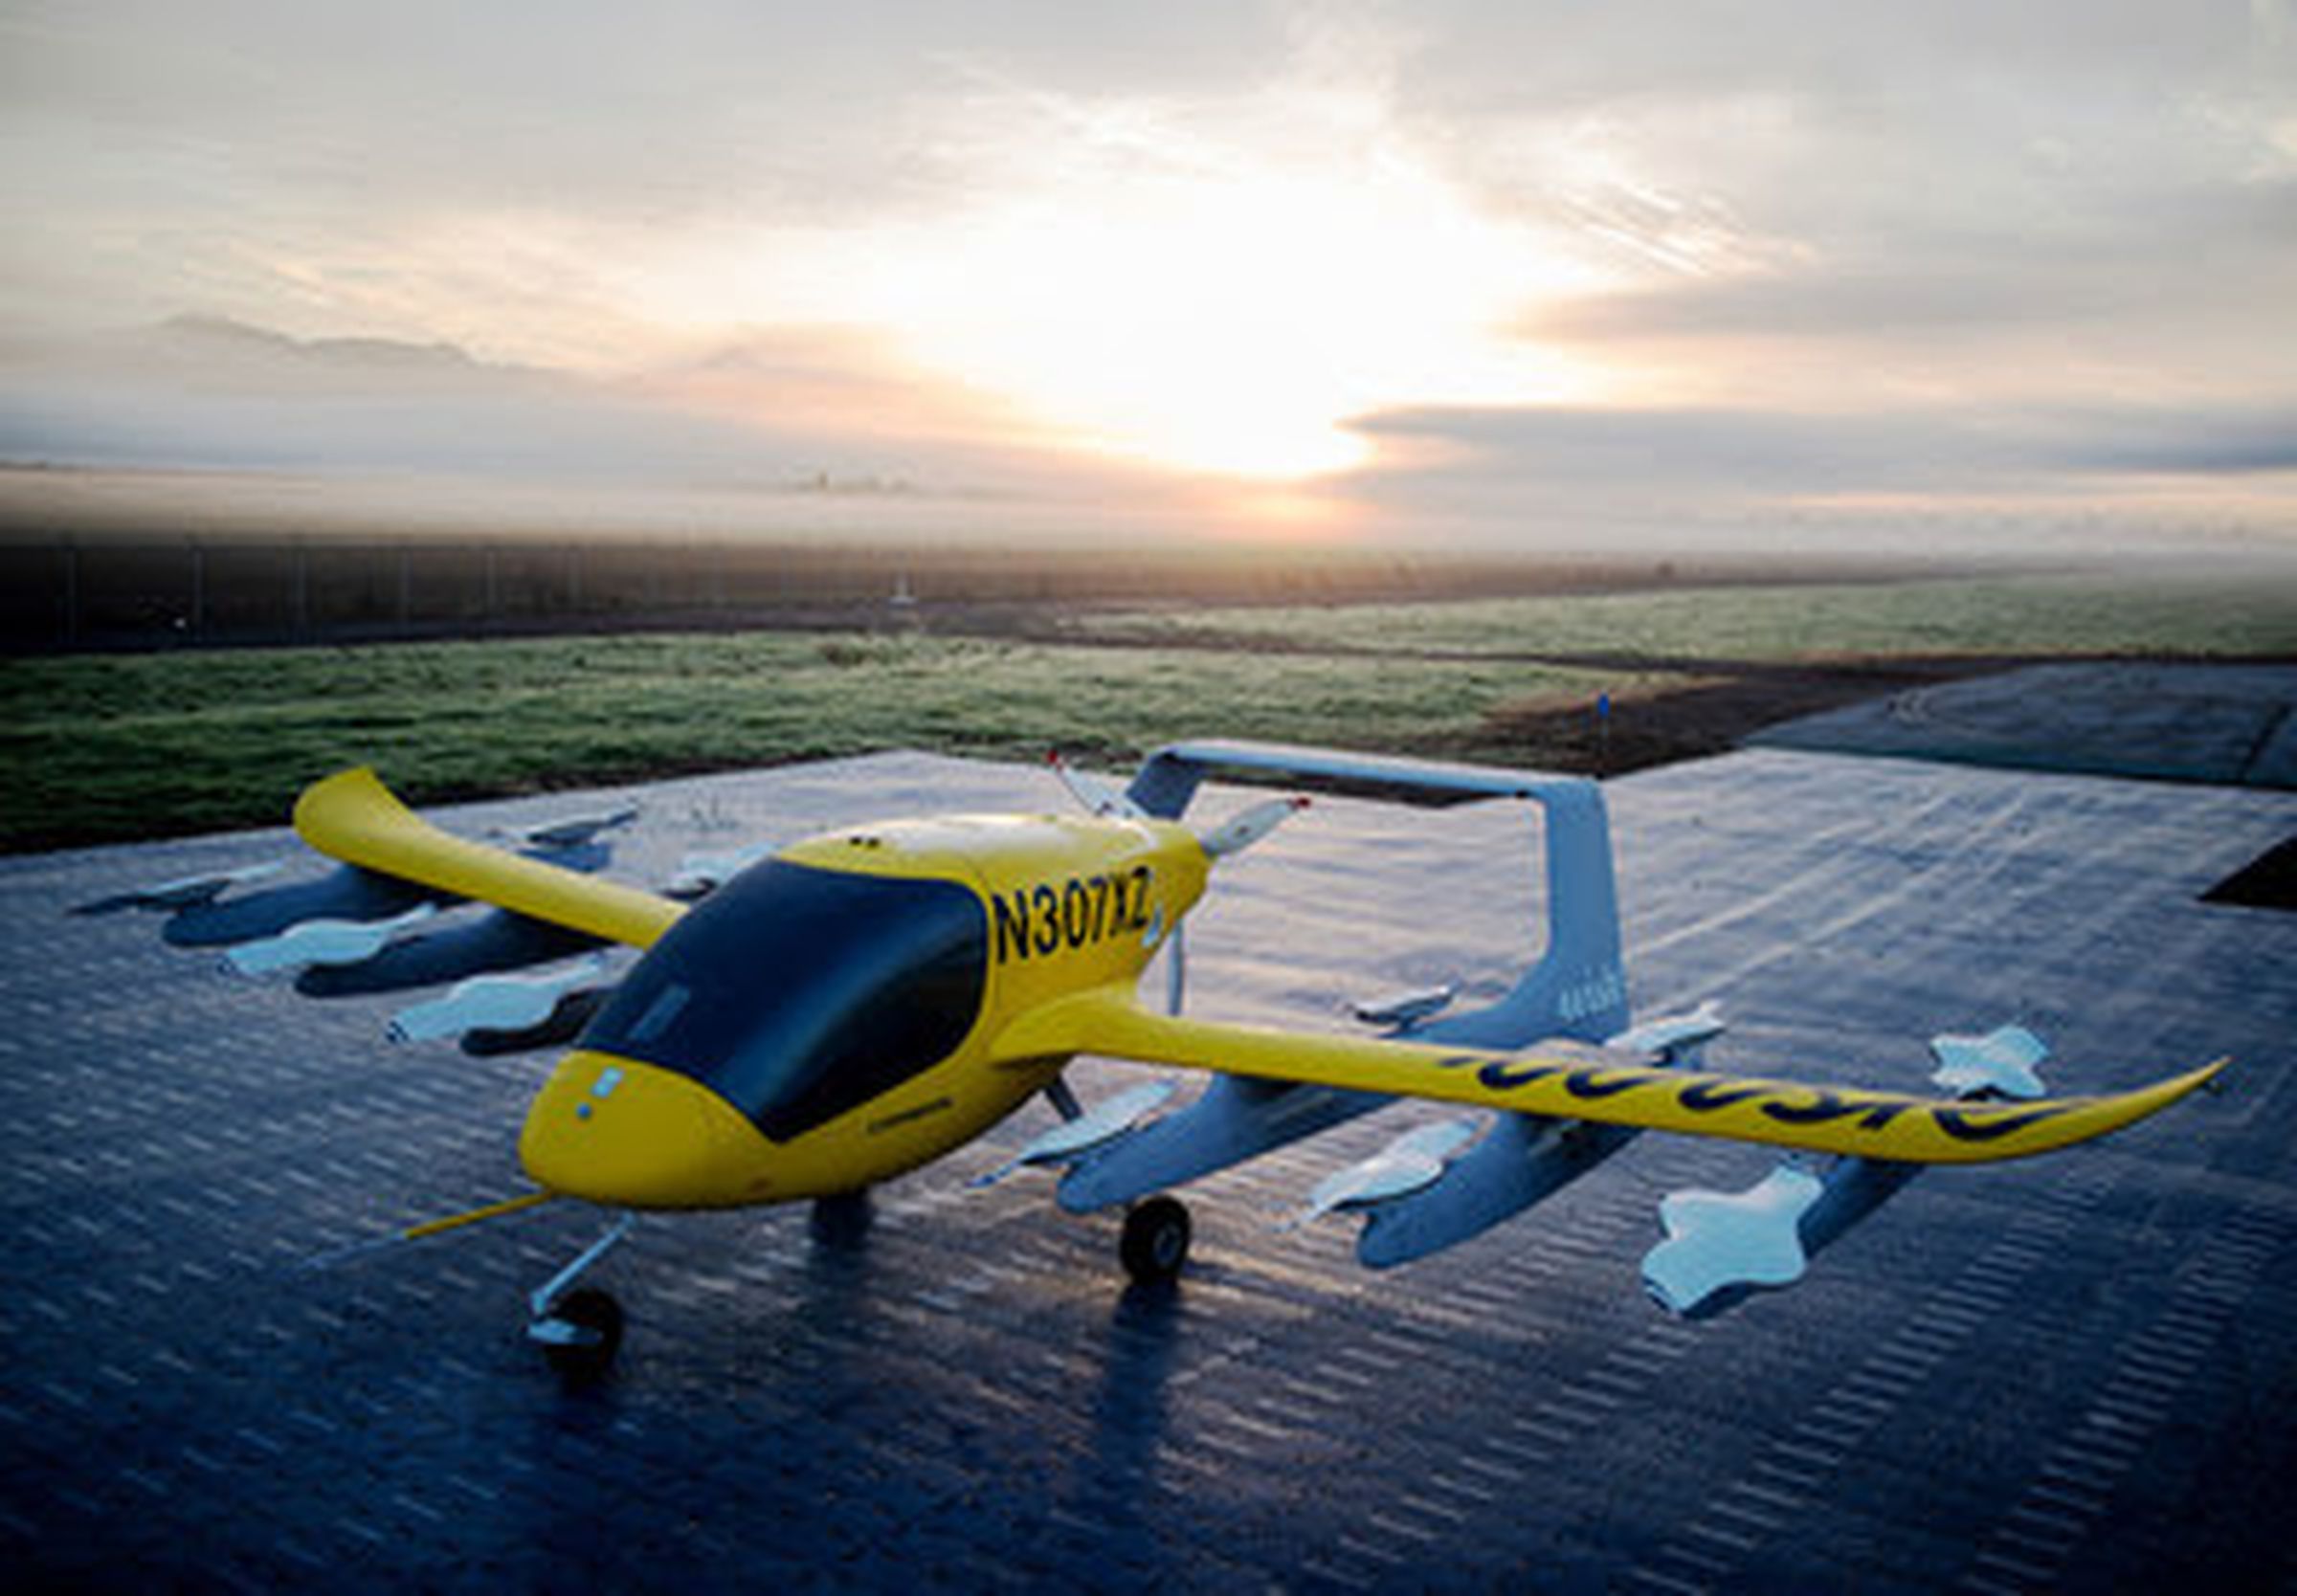 Wisk electric air taxi